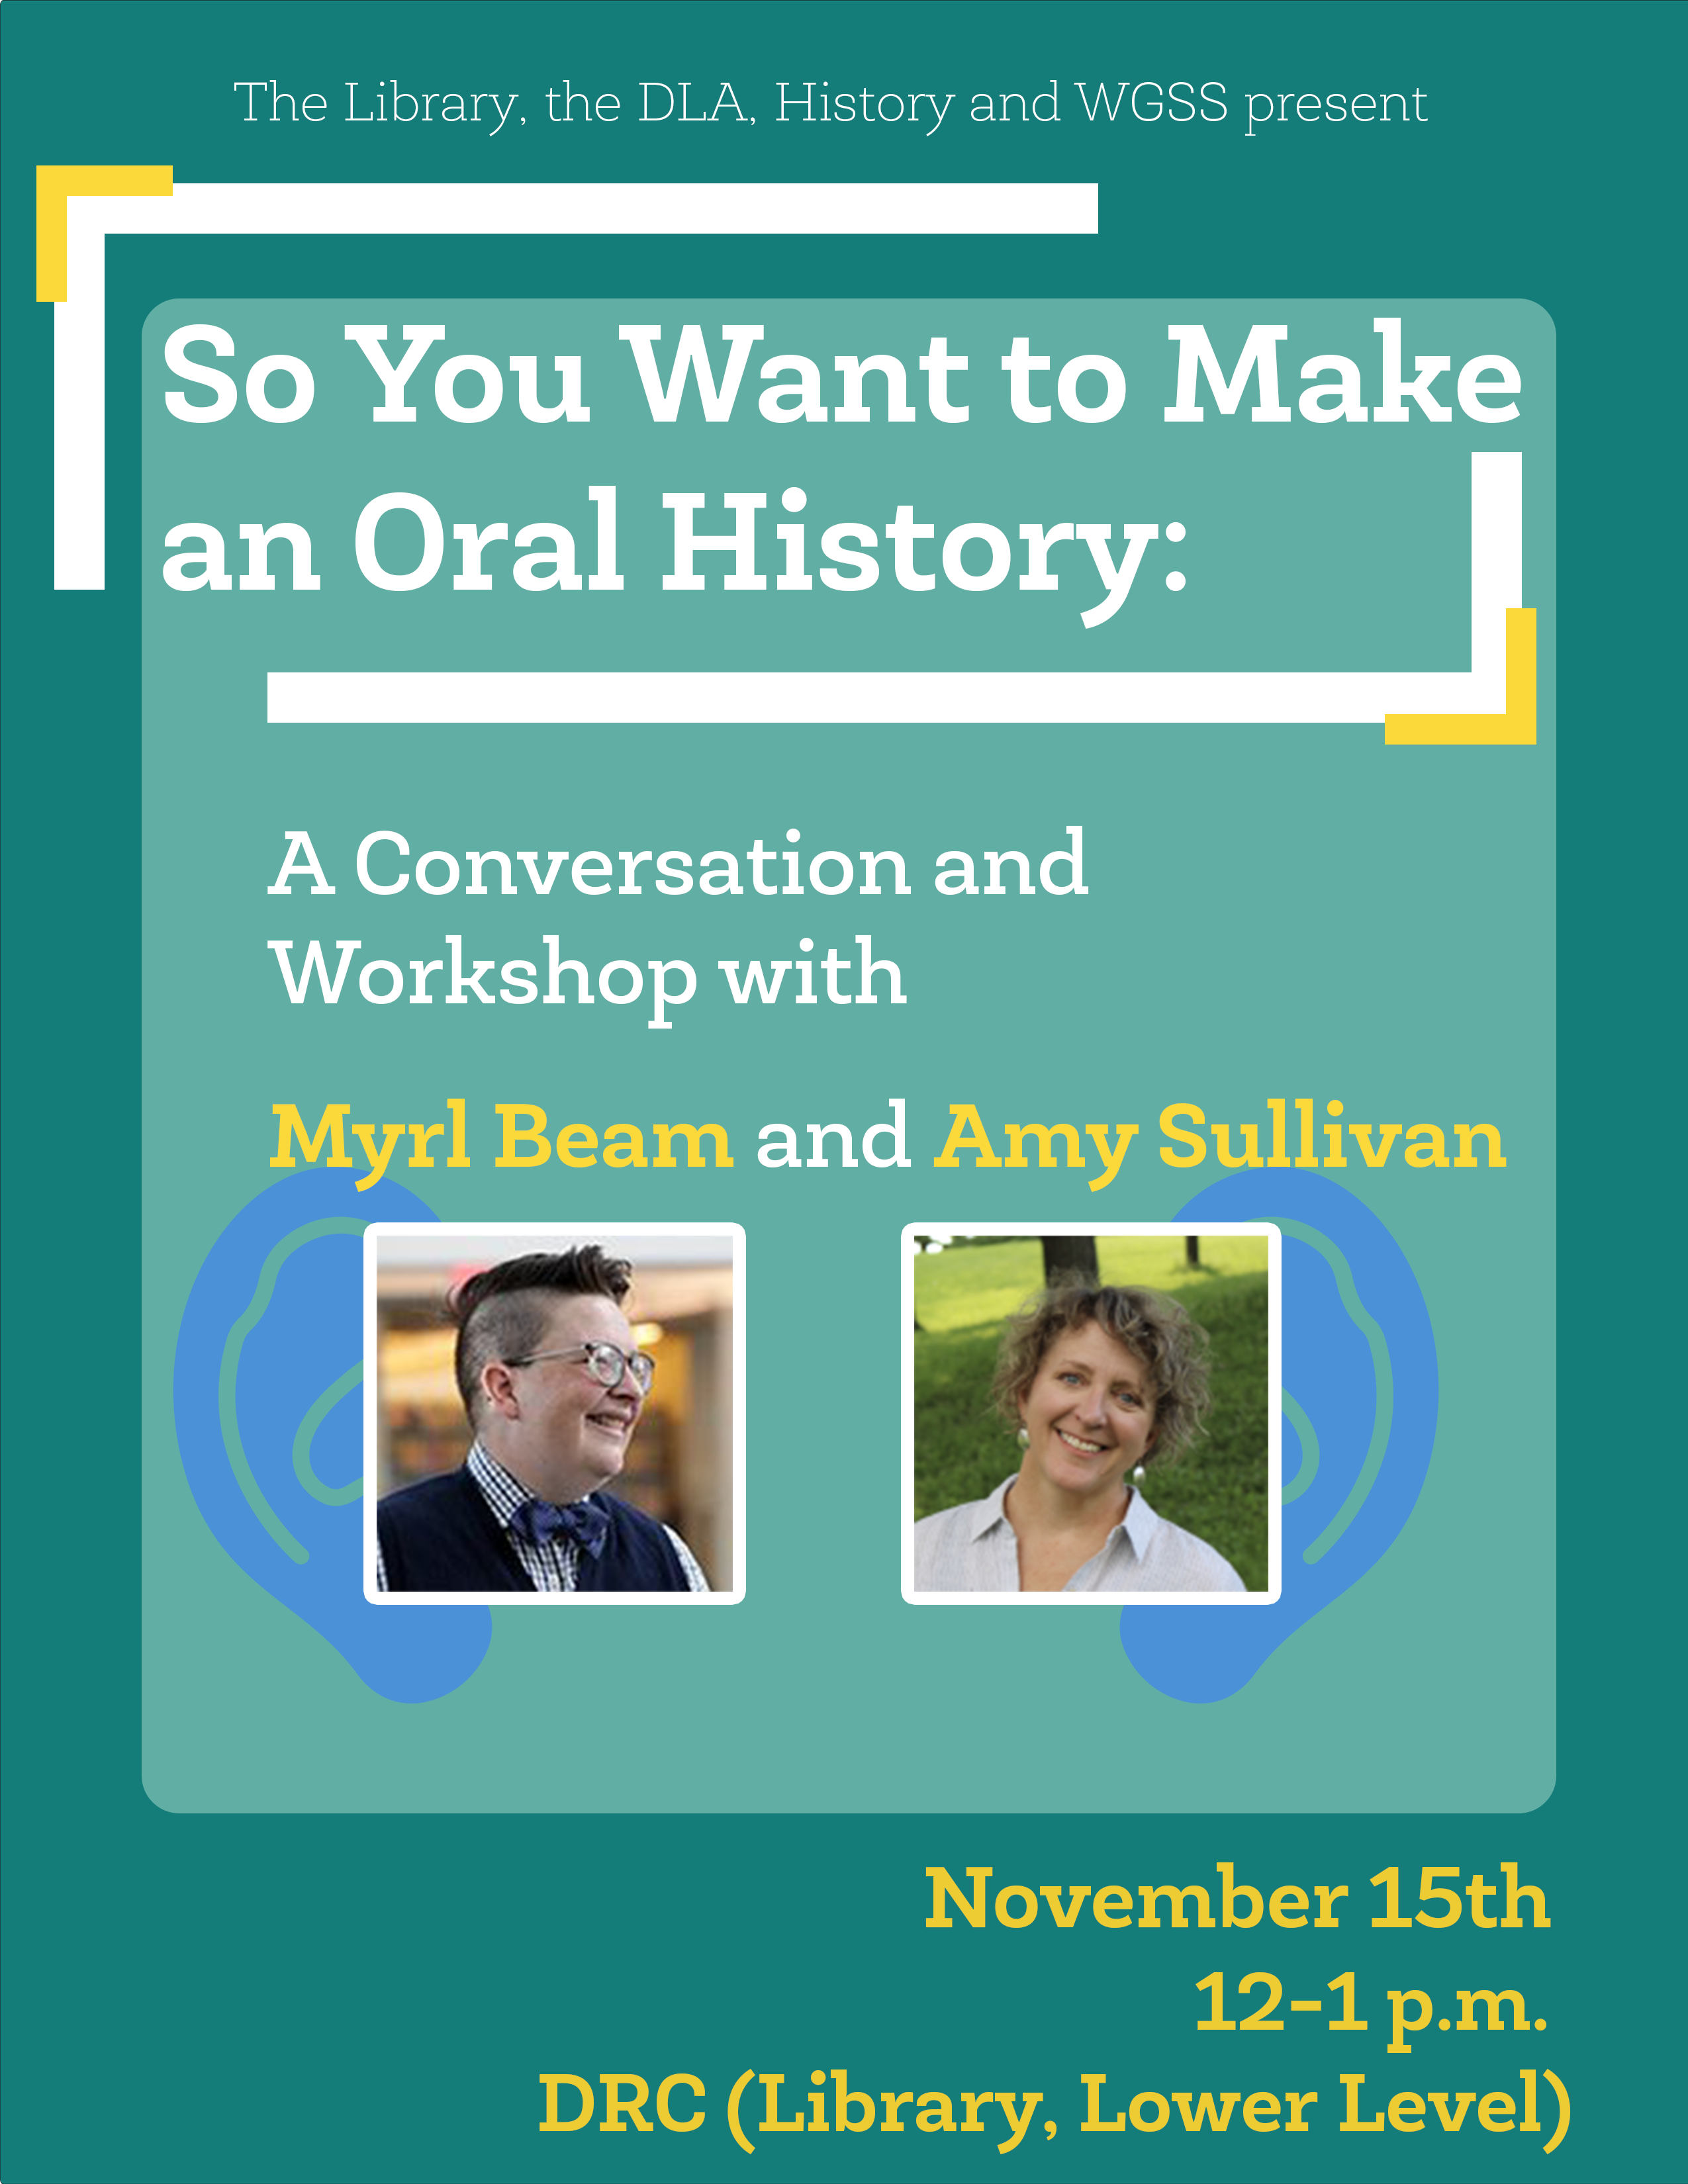 So You Want to Make an Oral History: A Conversation and Workshop with Myrl Beam and Amy Sullivan